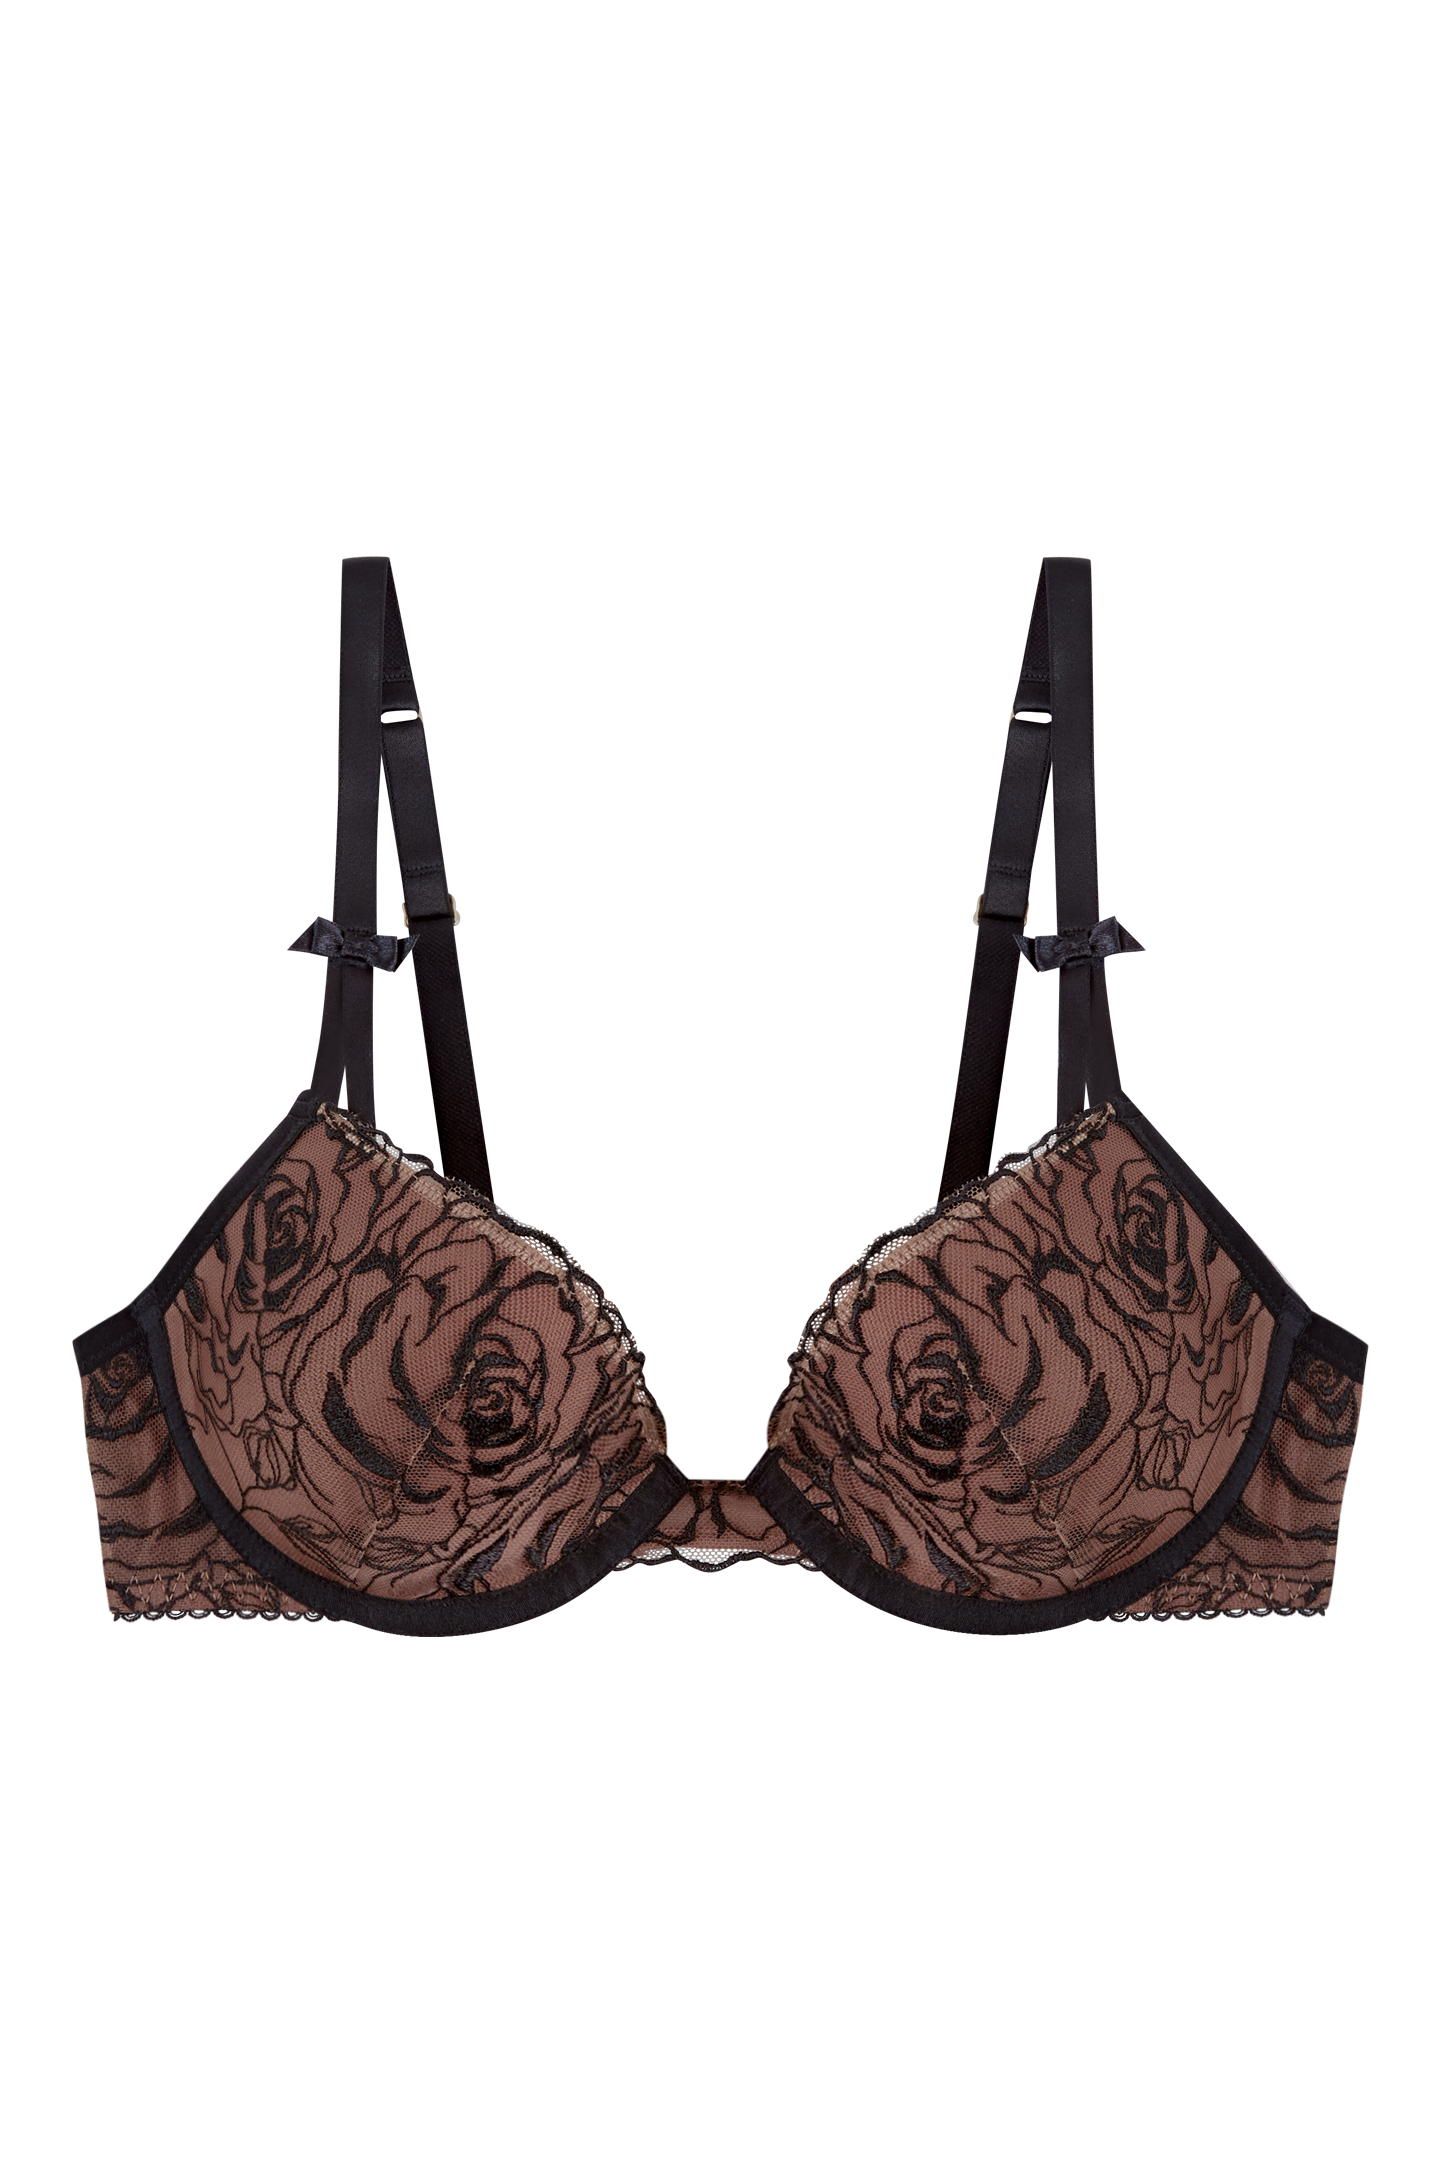 Buy CANDICE PLUNGE CONTOUR BRA online at Intimo